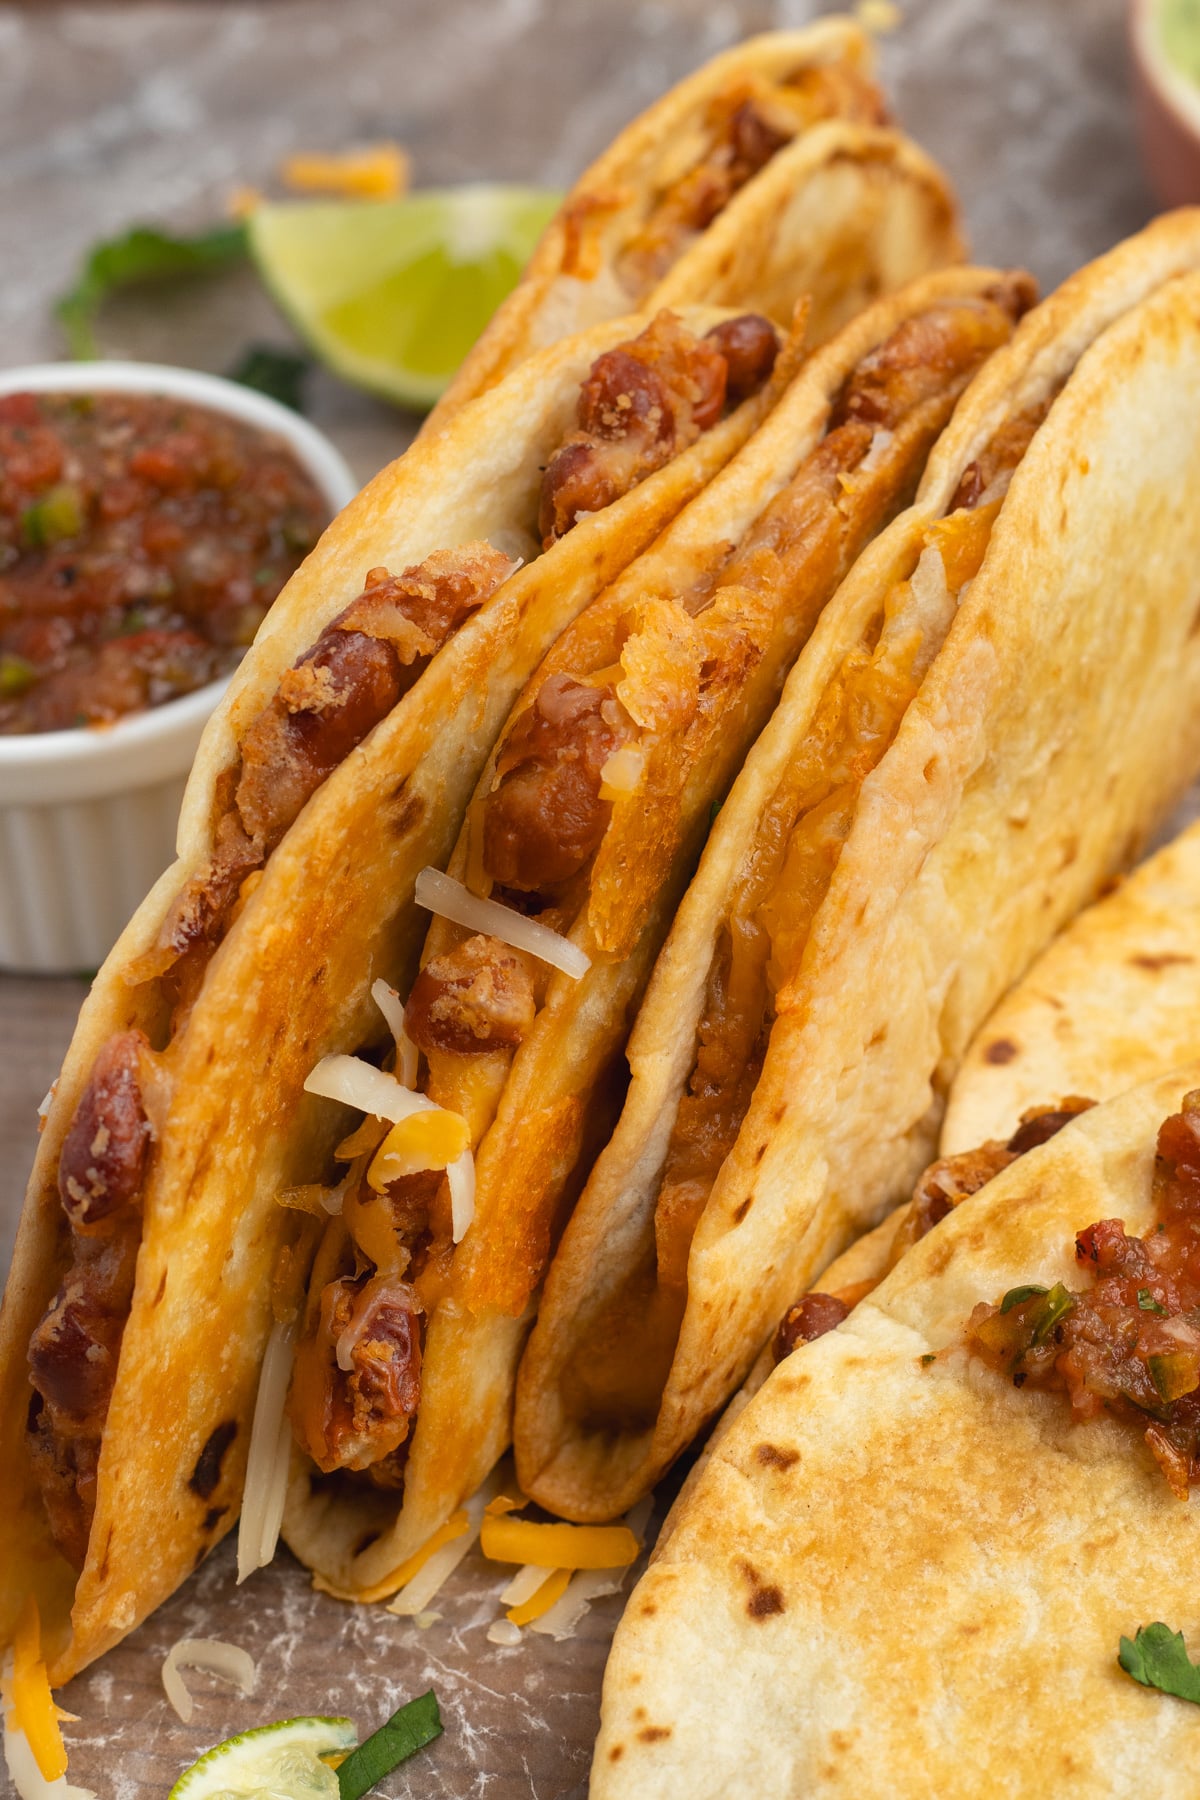 This is a close-up picture of the tacos.